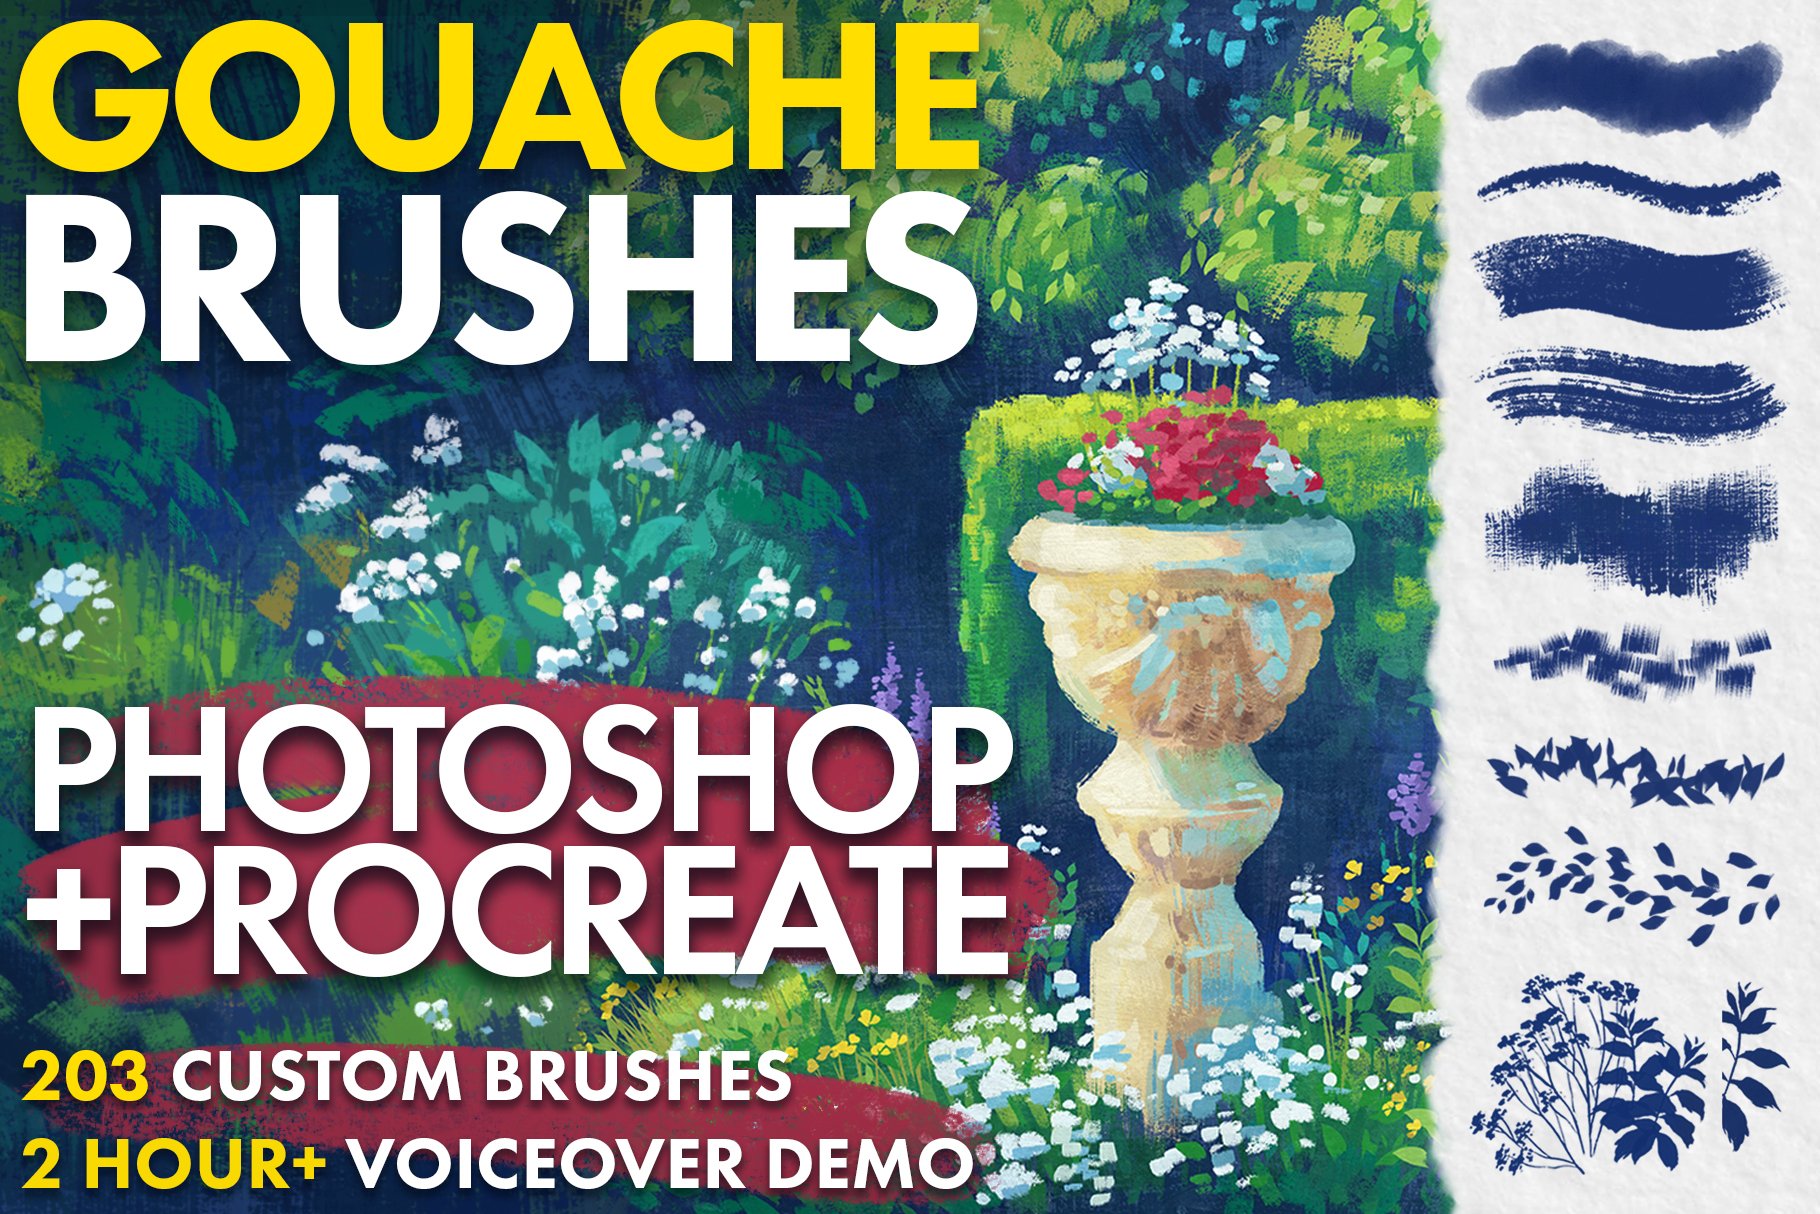 Gouache Brushes for Photoshop and Procreate